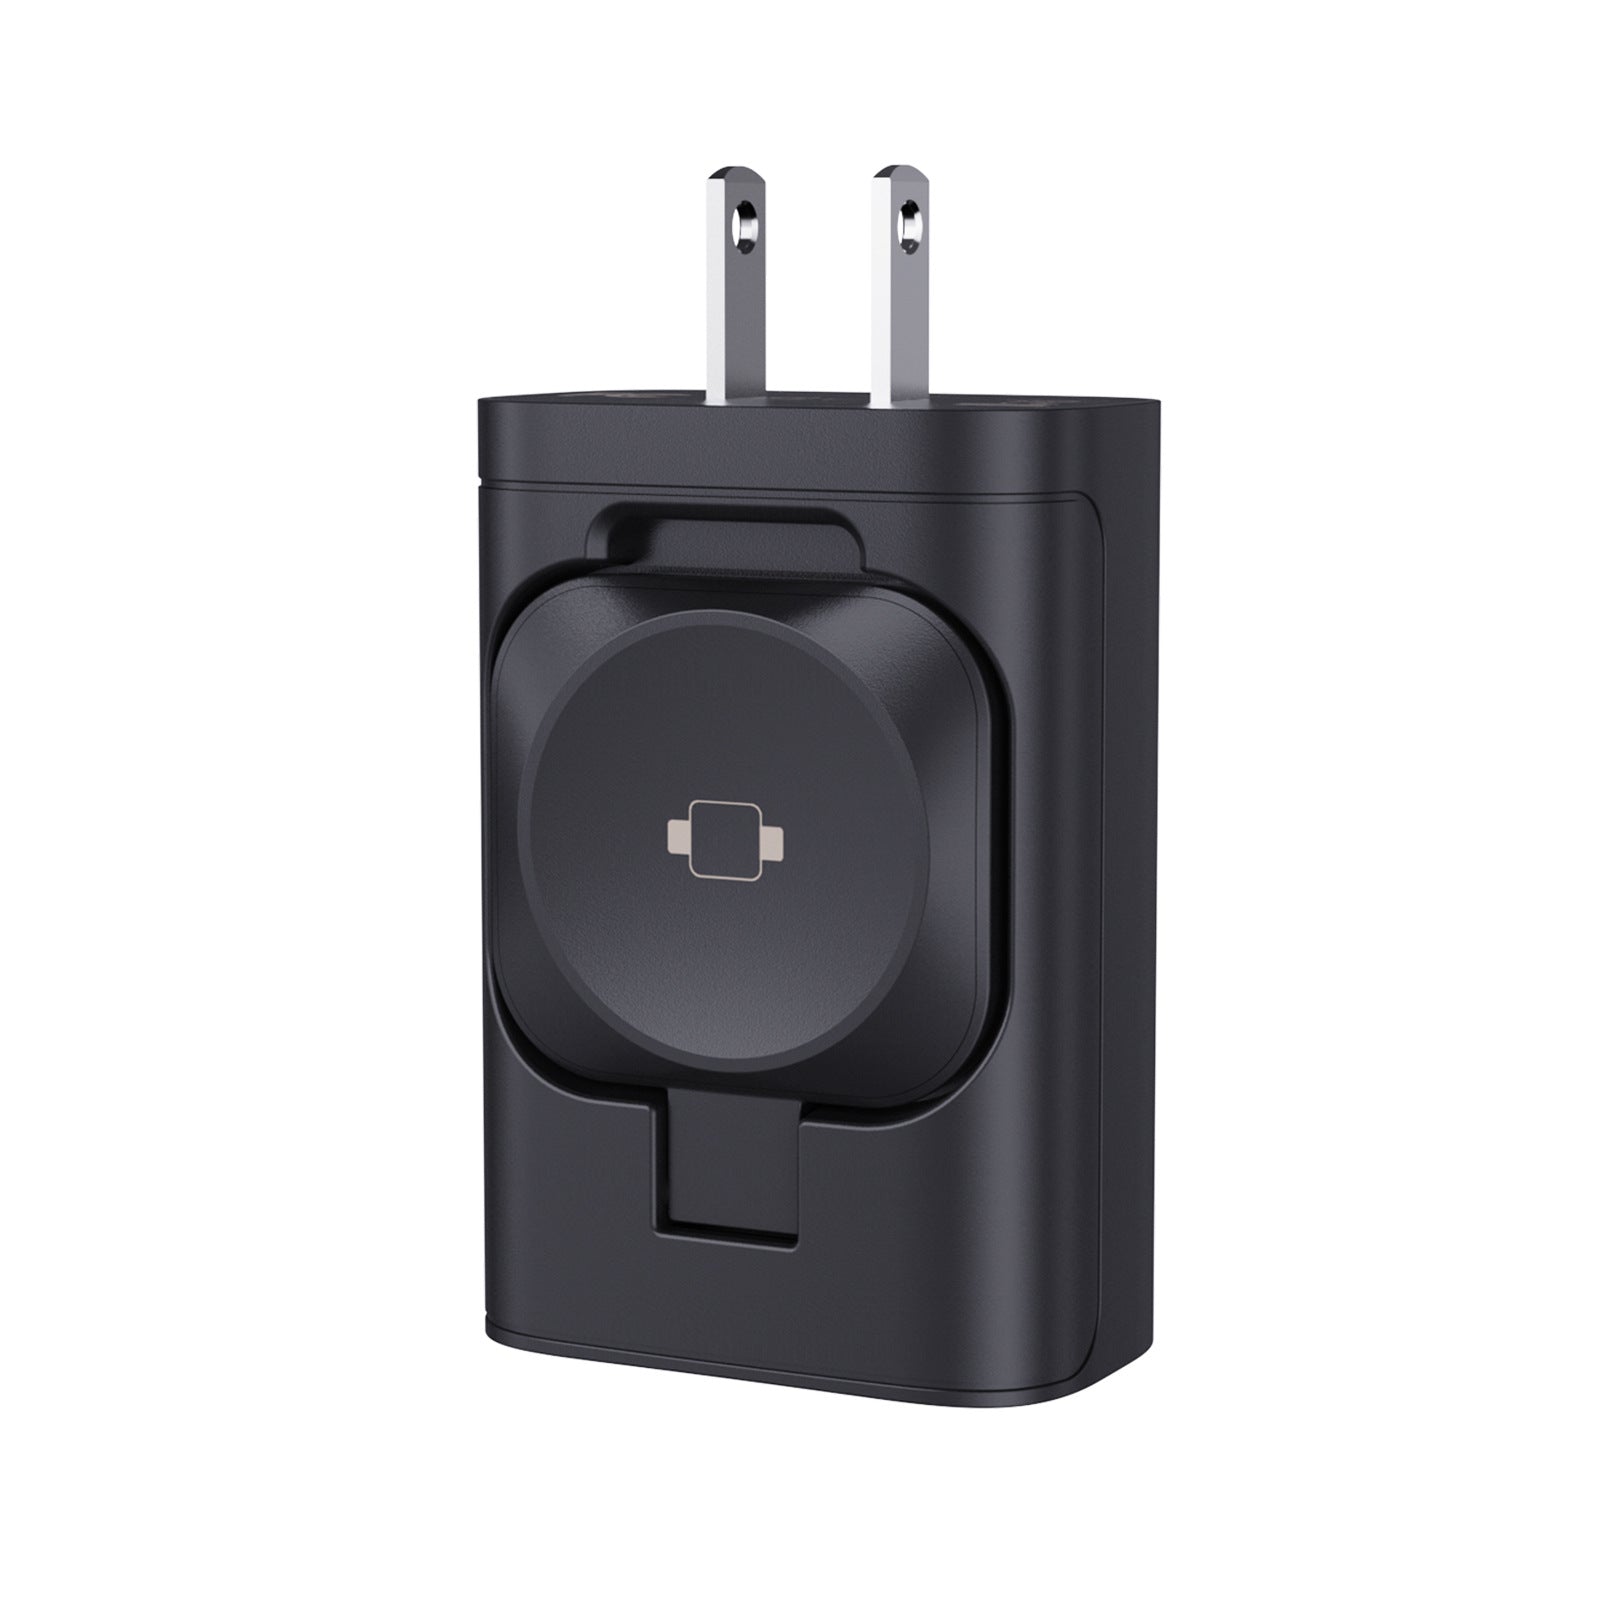 193TN All-in-One Wall Charger with Smart Watch Compatibility